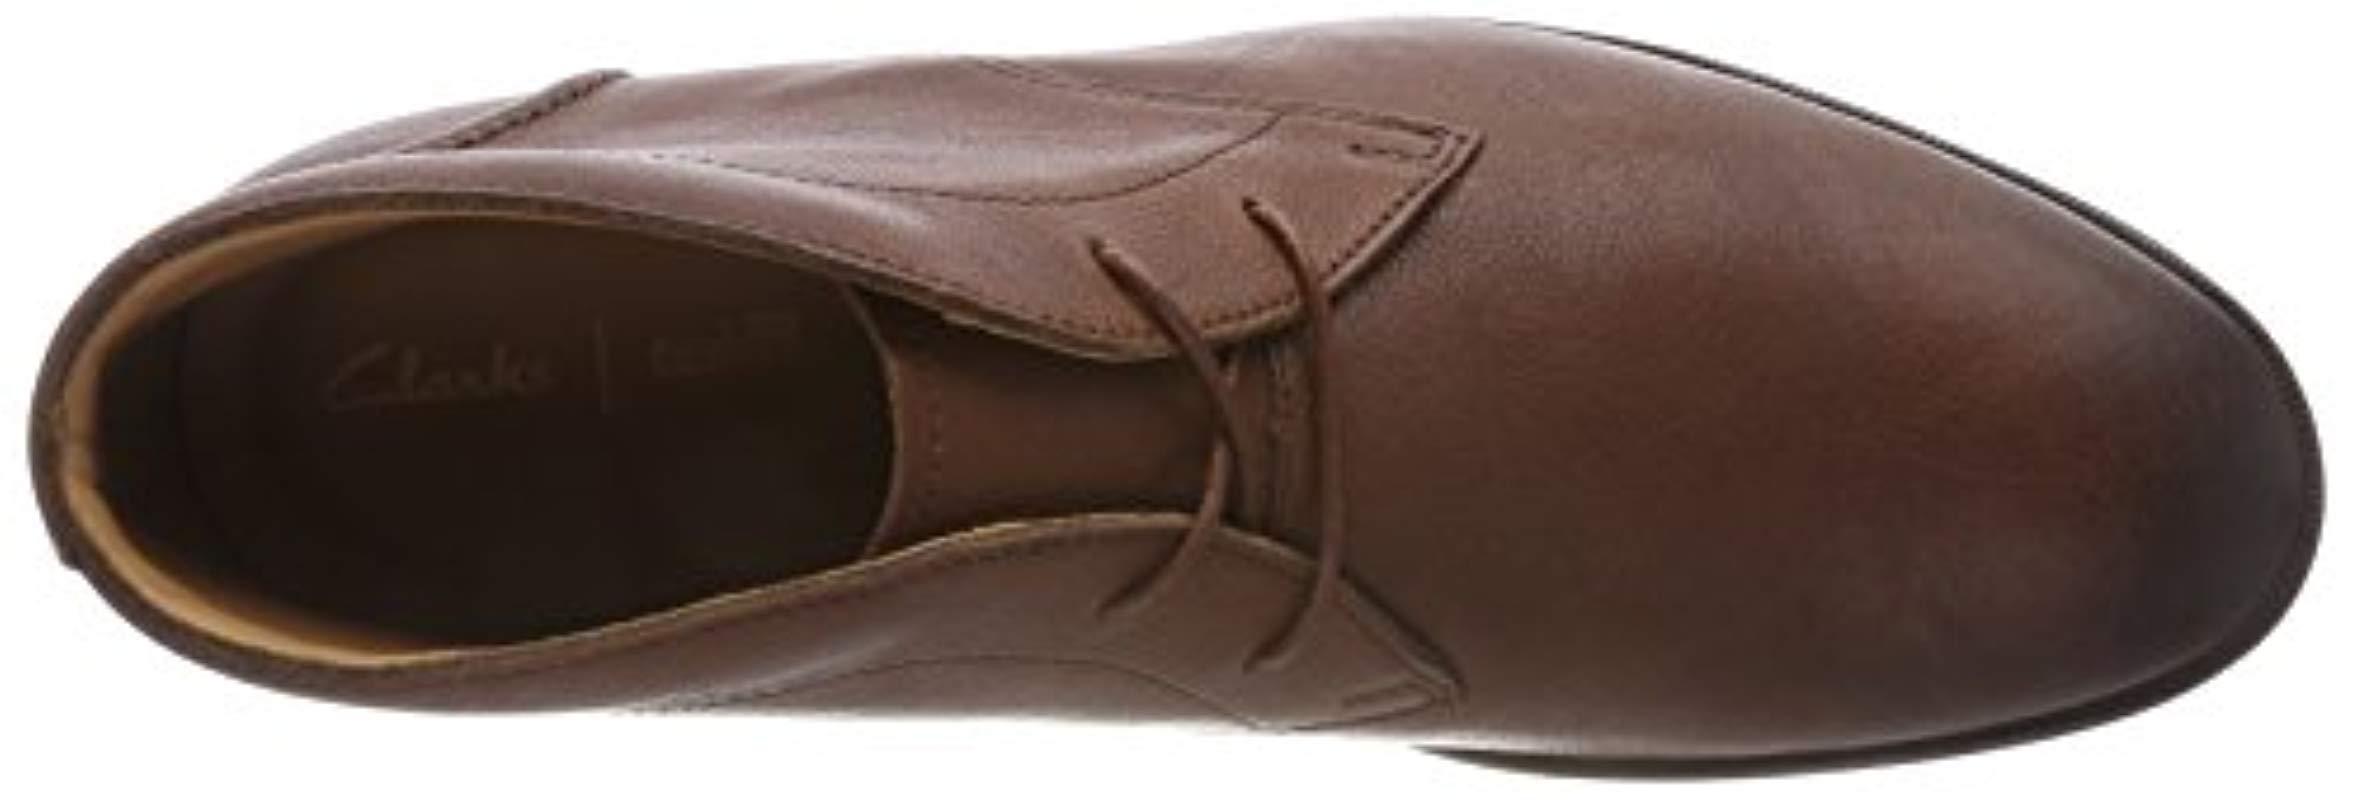 Clarks Glide Chukka in Brown for Men - Save 29% - Lyst